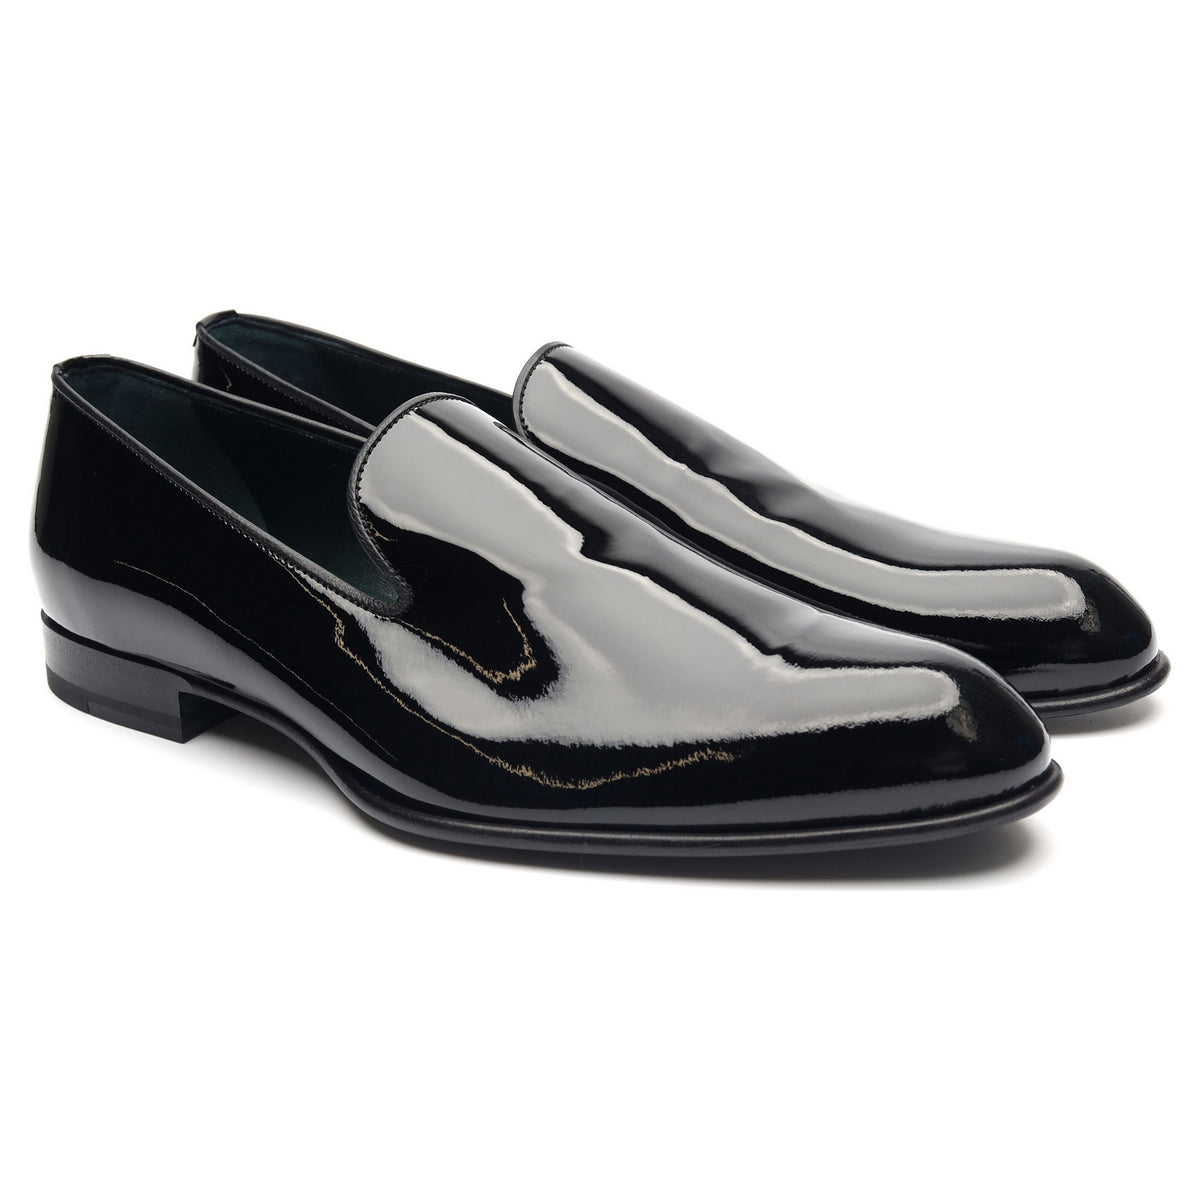 Patent Leather Evening Loafers UK 8 - Abbot's